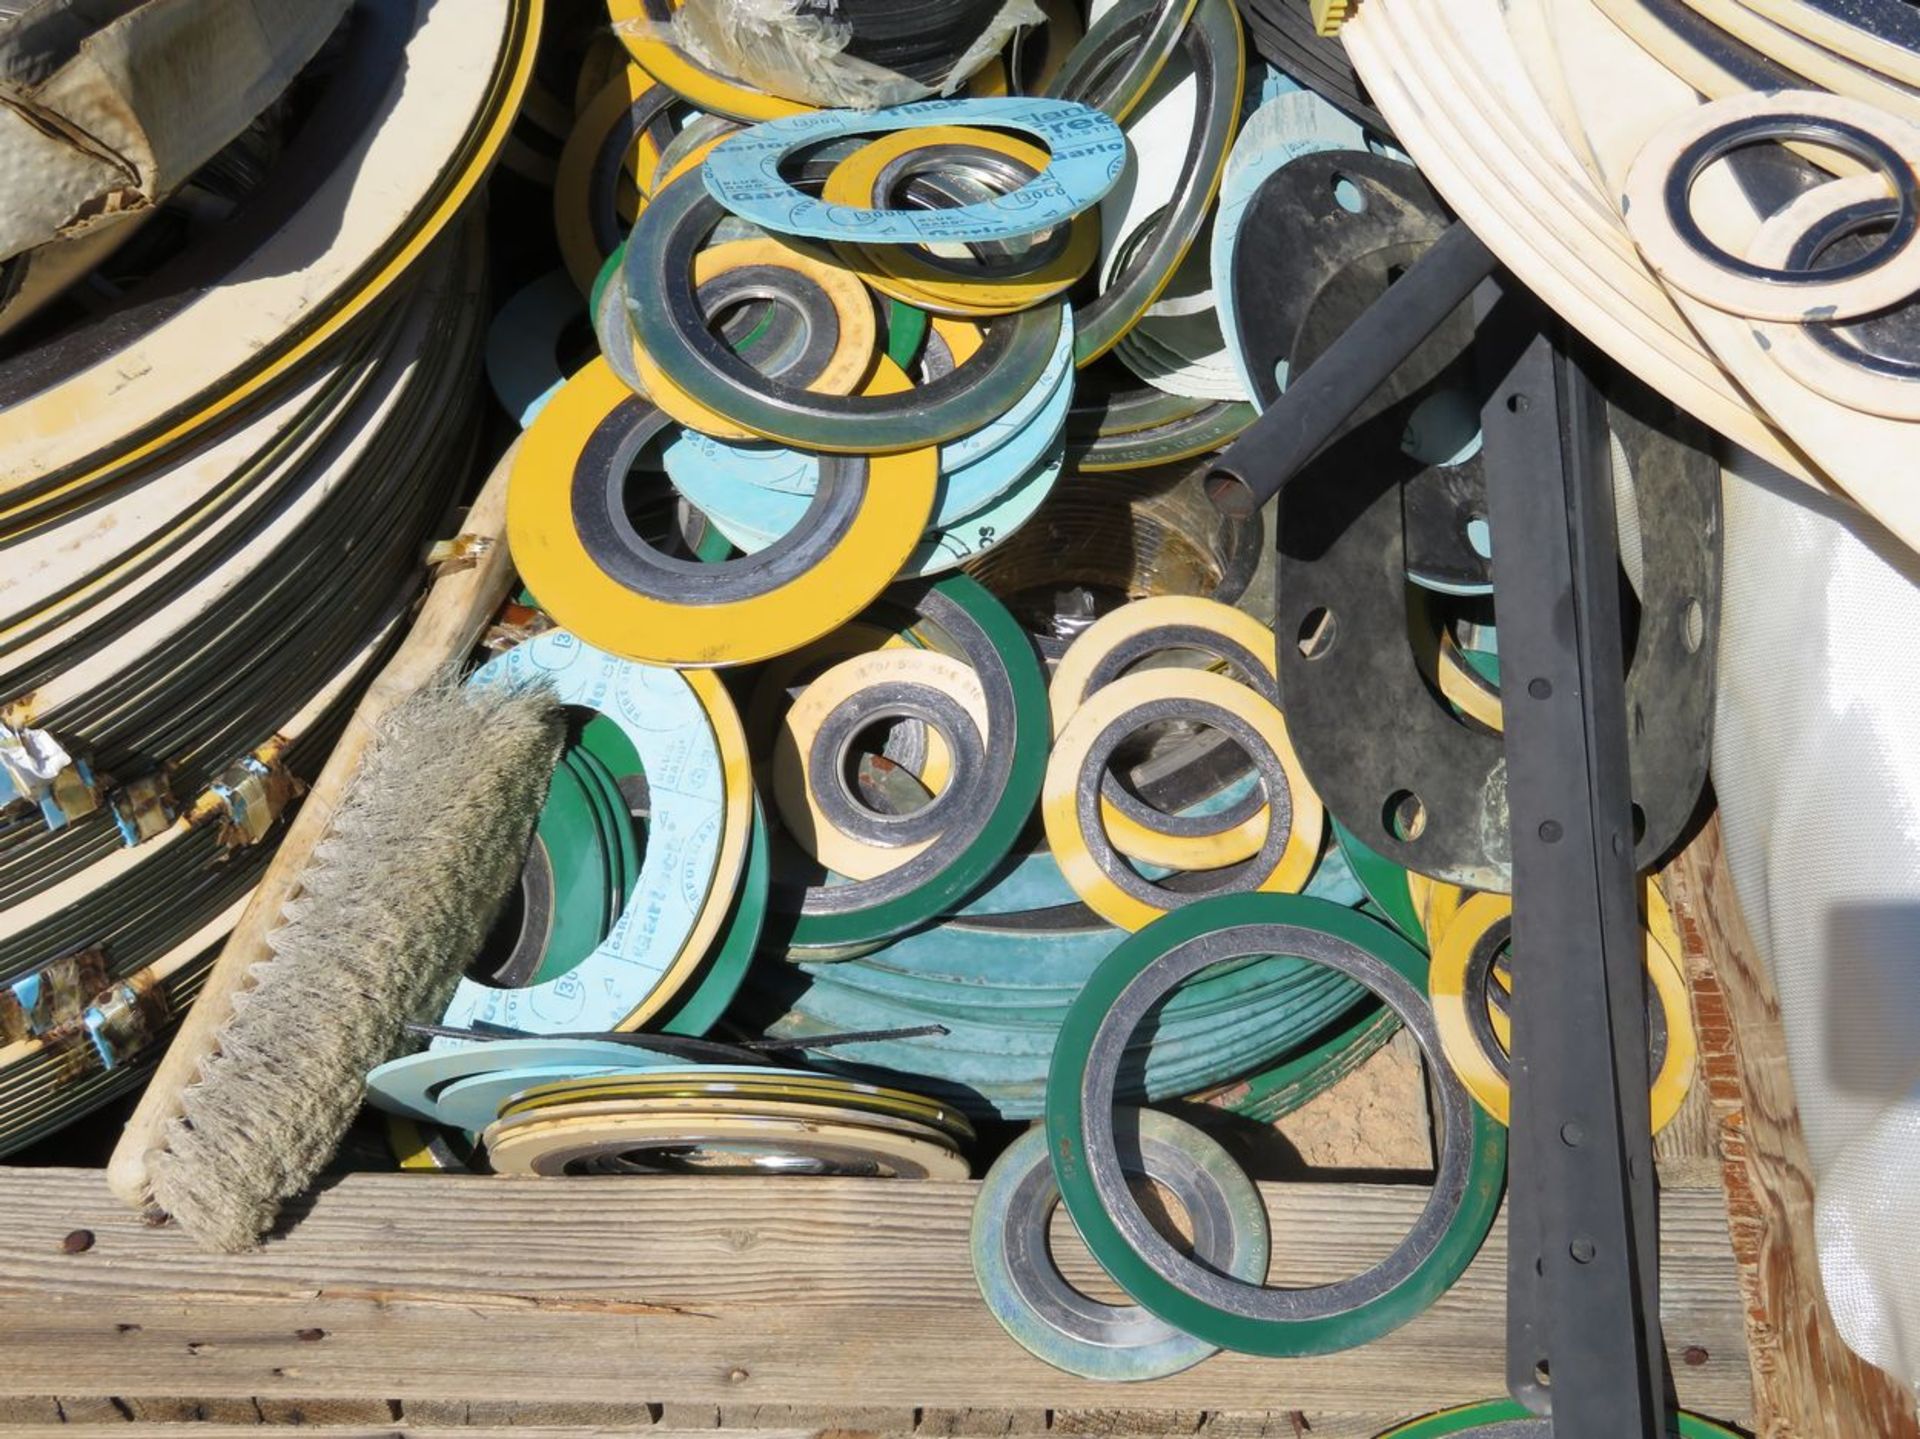 Large Qty of Spiral Wound Gaskets, Sizes Ranging from 35" to 3-1/2". Asset Located at 42134 Harper - Image 5 of 9